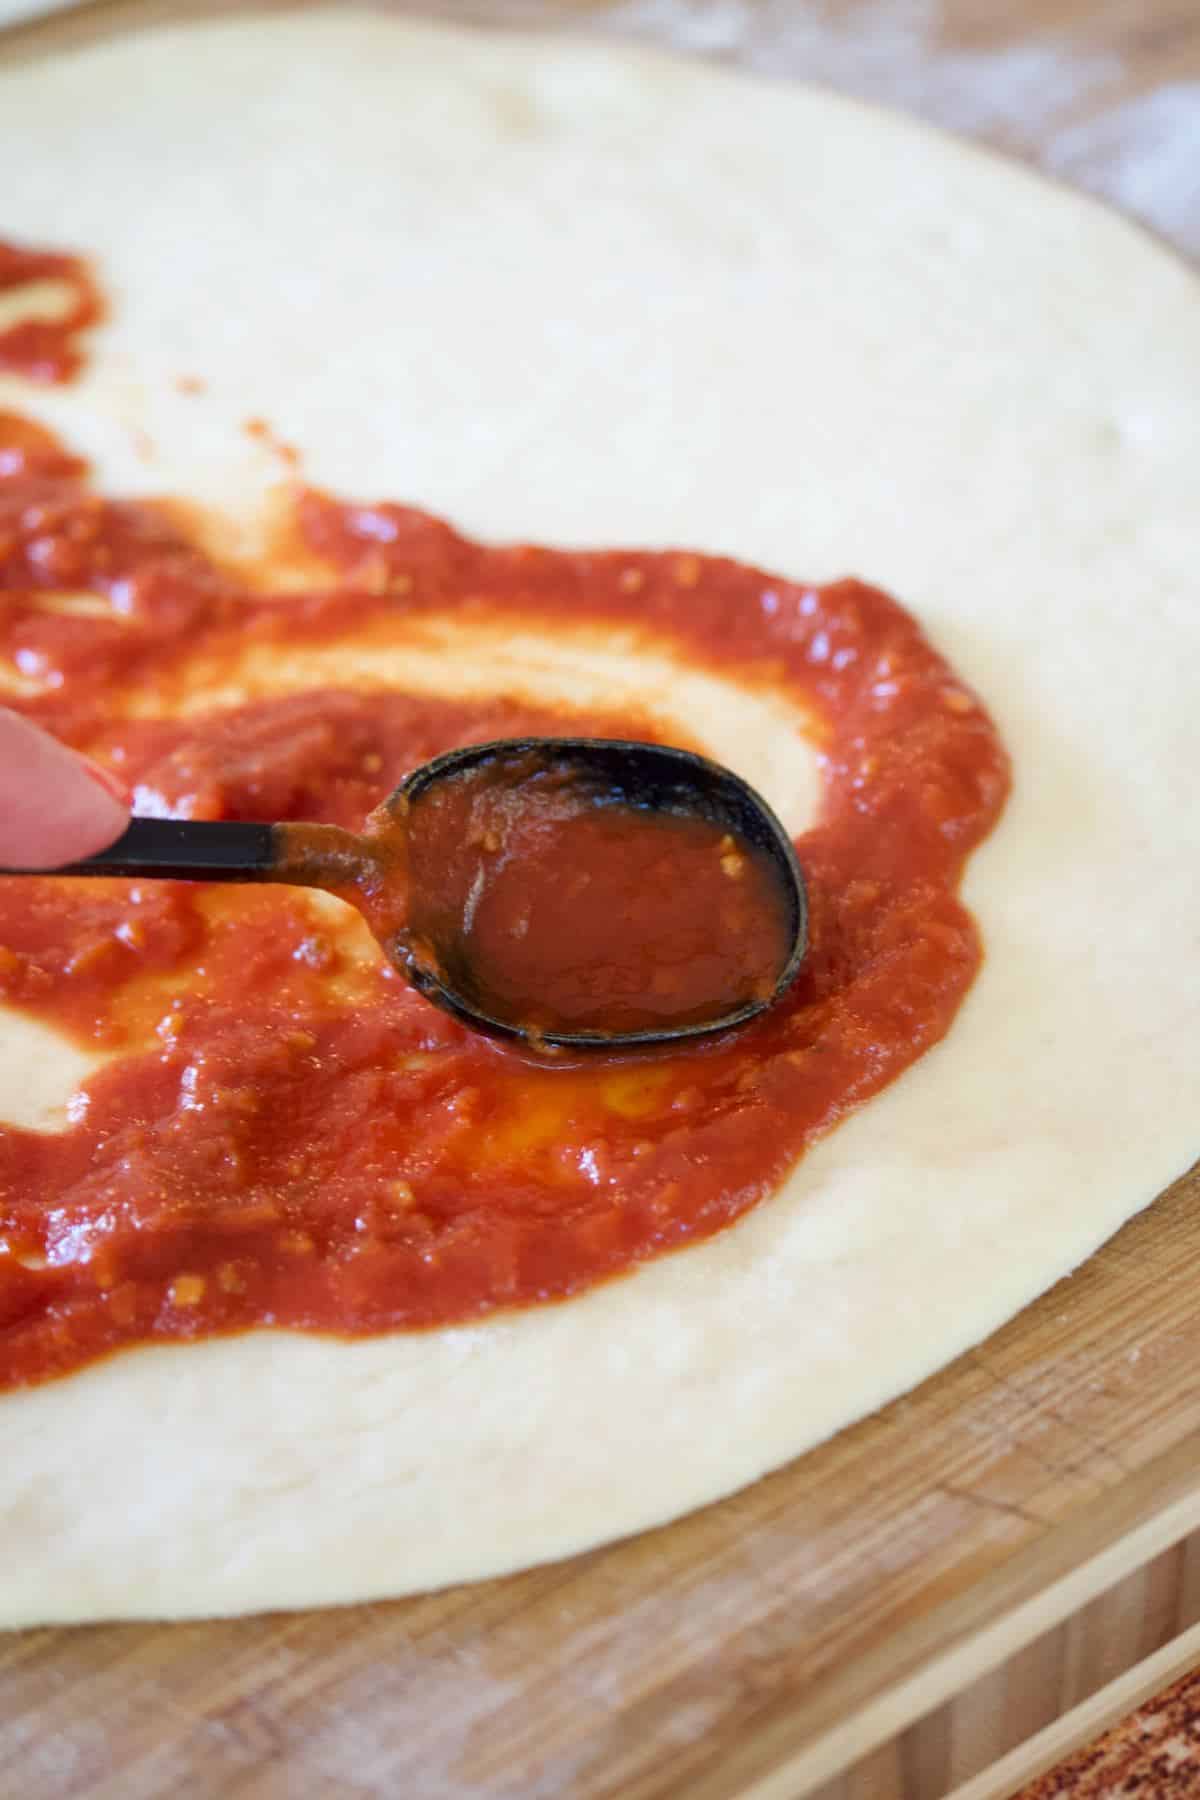 Spooning homemade pizza sauce on no rise pizza dough.